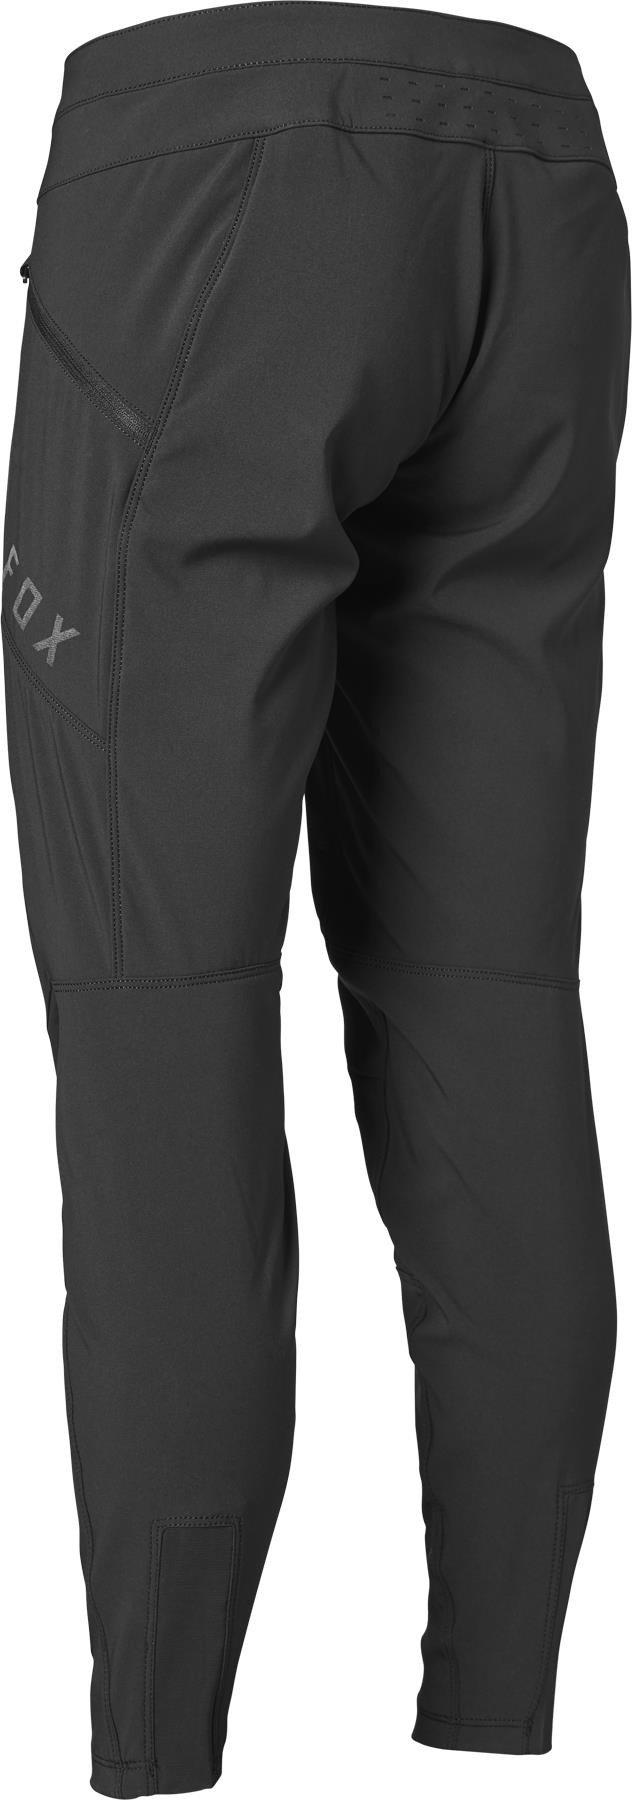 Defend Fire Womens MTB Cycling Trousers image 1